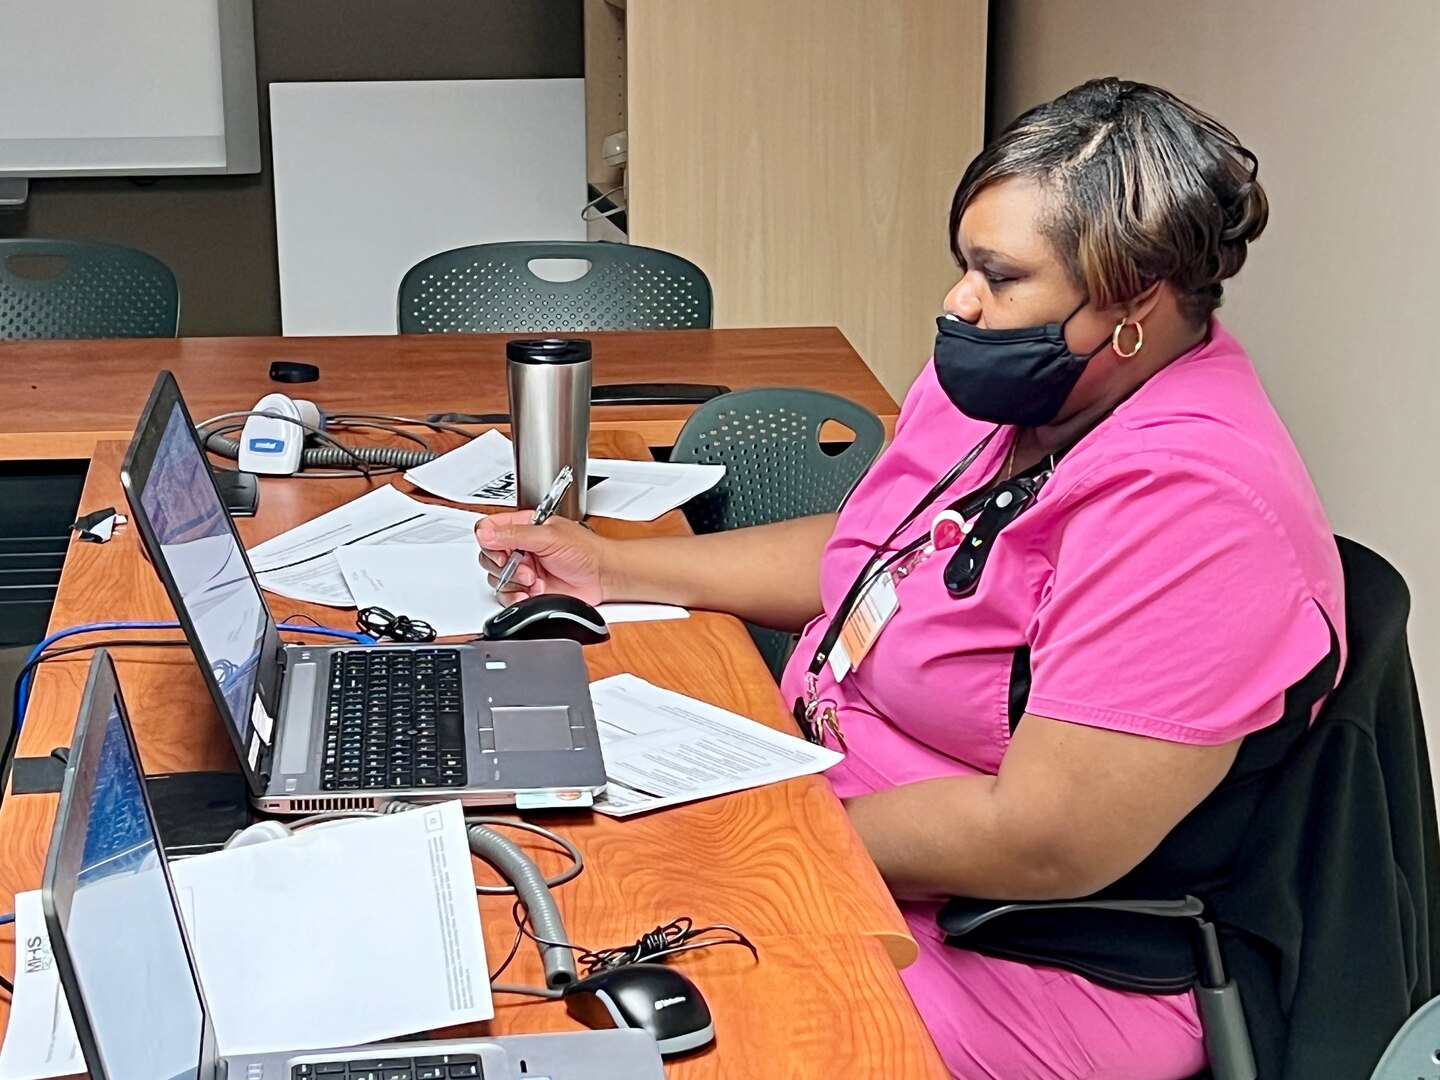 Shenita Barnes, medical service assistant for the Bayne-Jones Army Community Hospital OB/GYN clinic takes advantage of the MHS GENESIS learning lab March 10 at the Joint Readiness Training Center and Fort Polk.